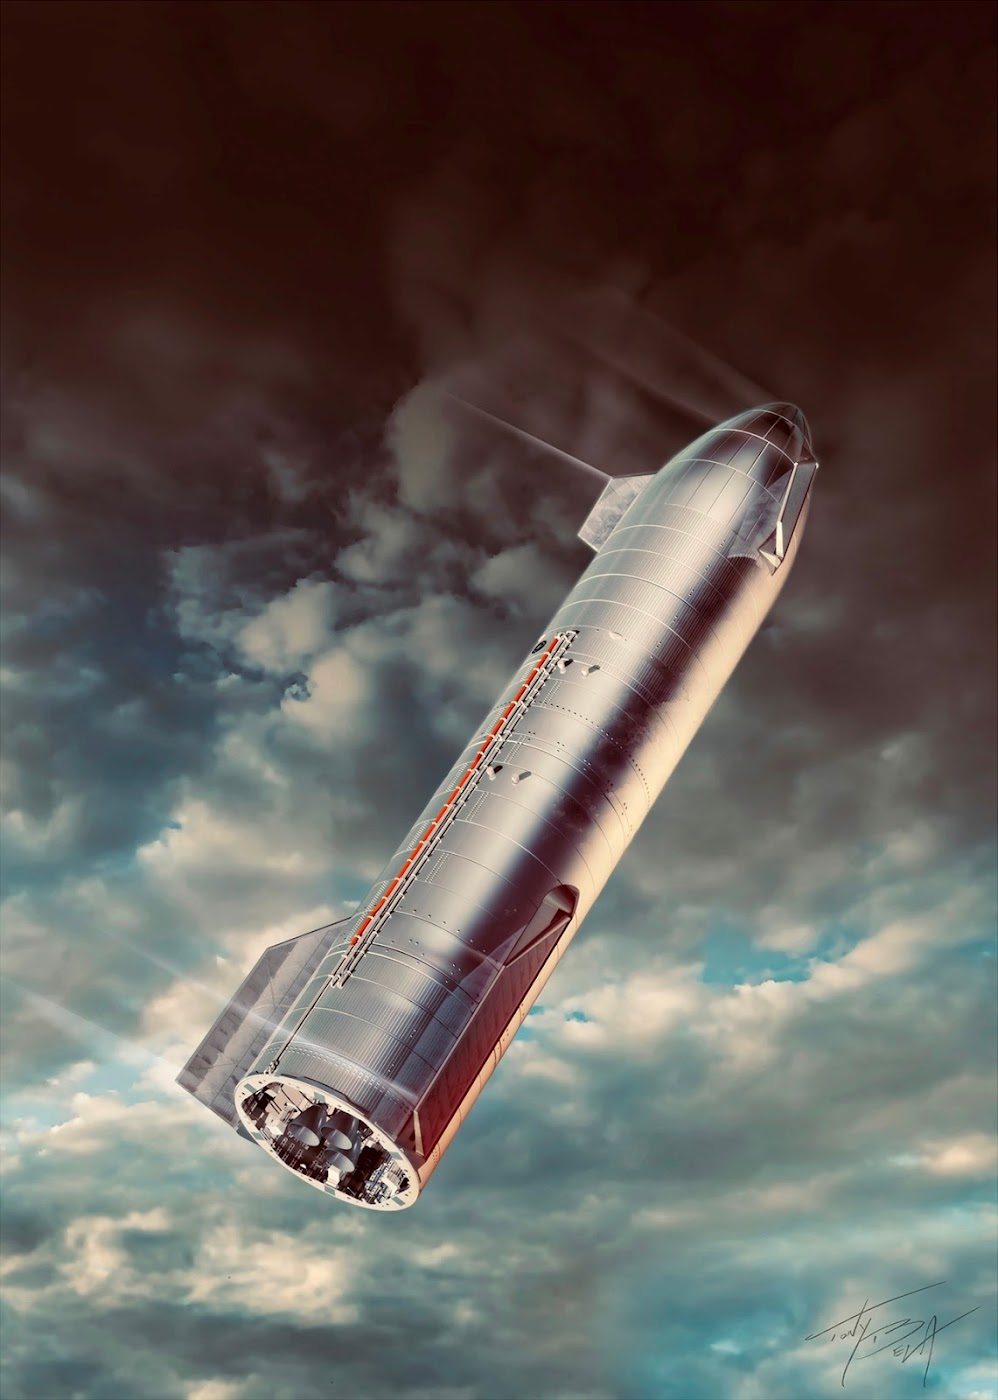 Poster of SpaceX's Starship SN8 belly flop maneuver by Tony Bela